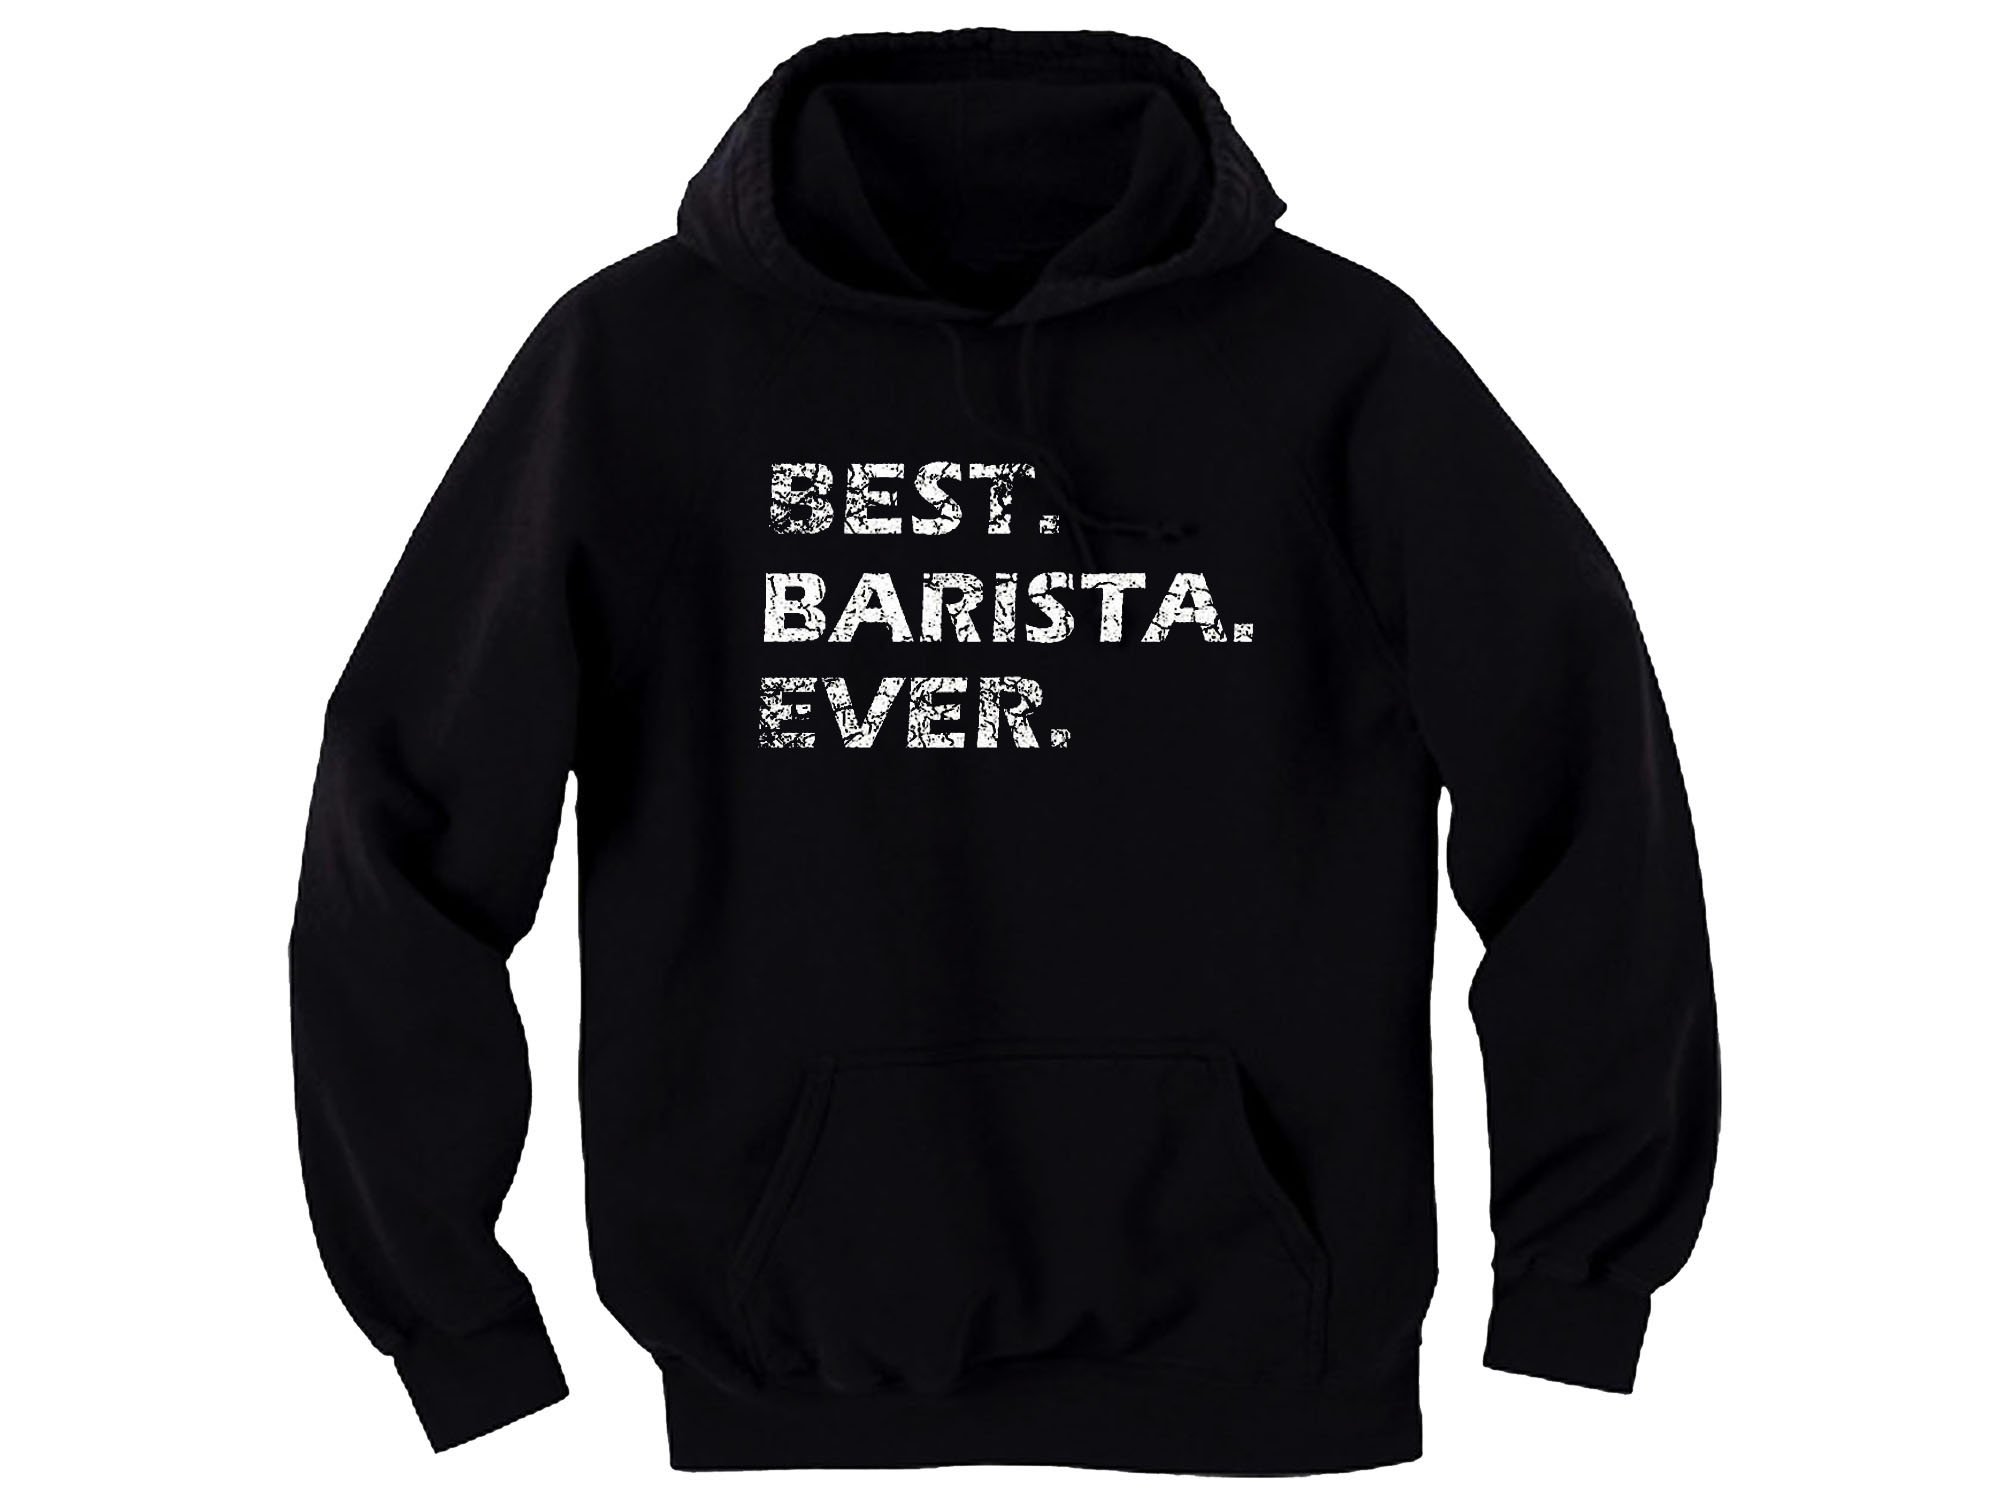 Best barista ever distressed print hoodie Great Gift!!!